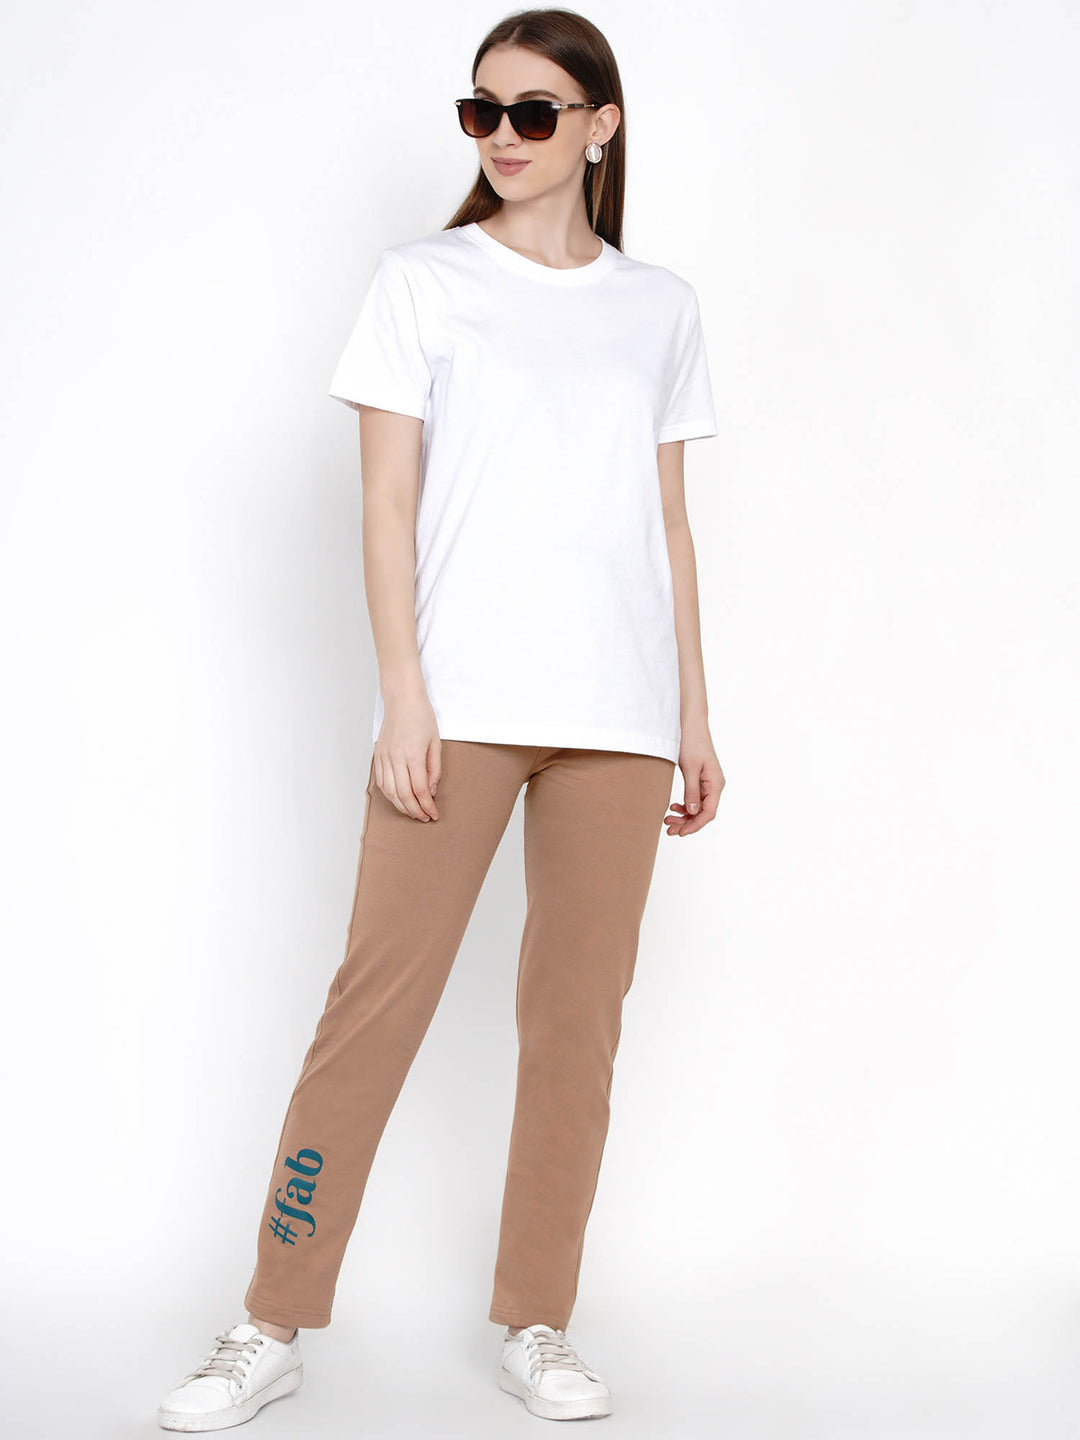 Beige Cotton Loop Knit Solid Track Pant